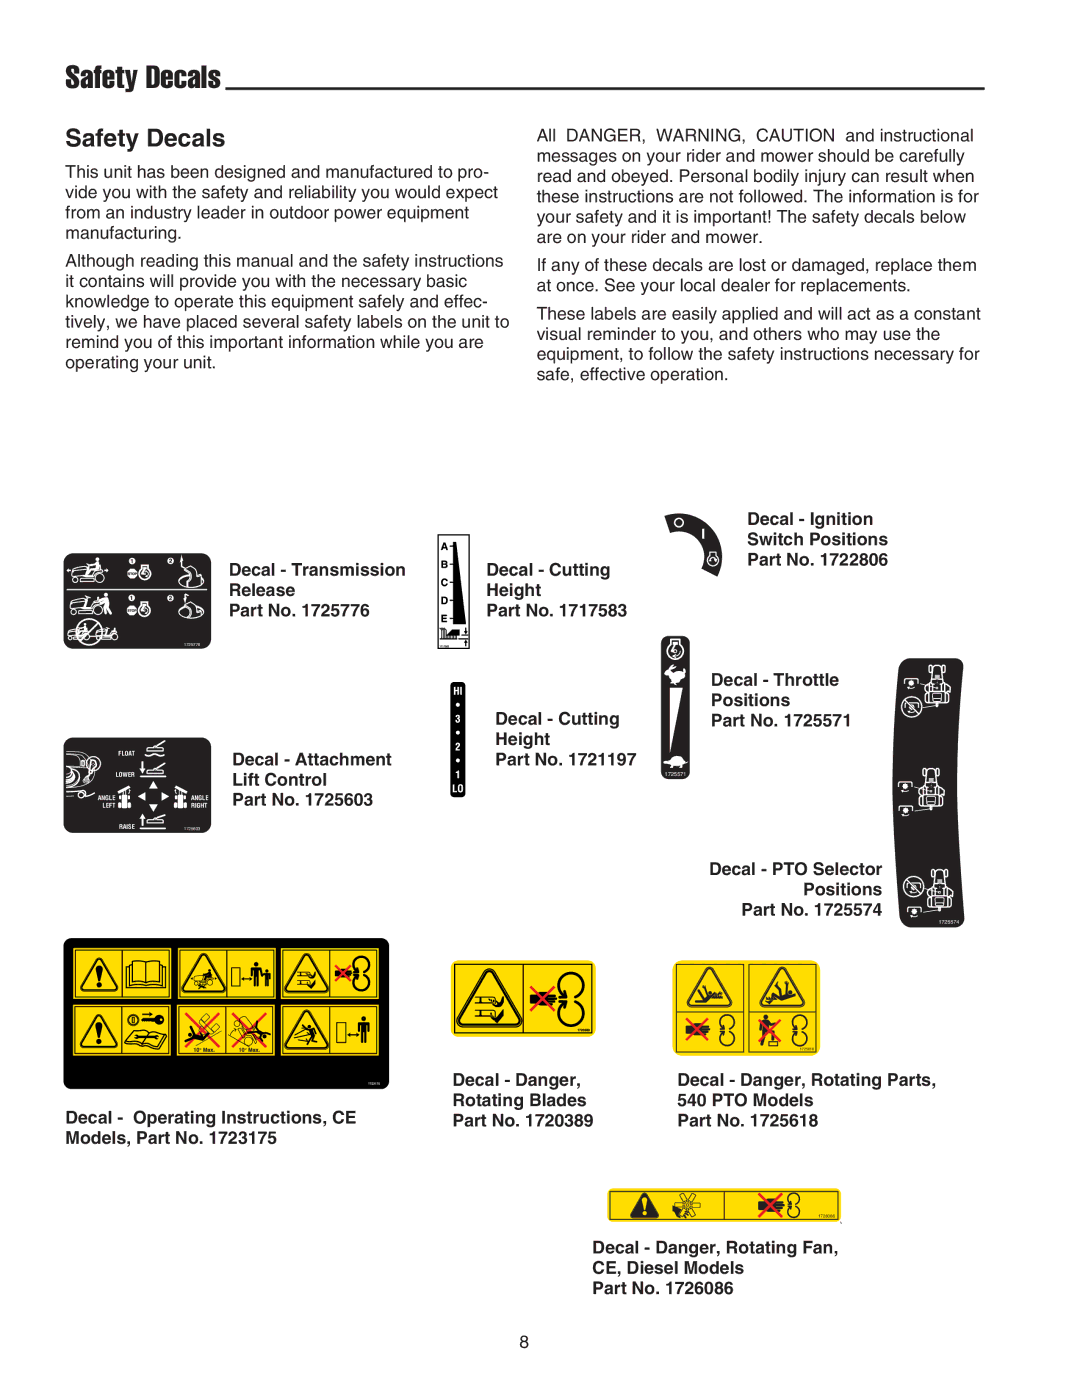 Snapper SGT27540D manual Safety Decals, Decal PTO Selector Positions, Decal Danger, Rotating Fan CE, Diesel Models 